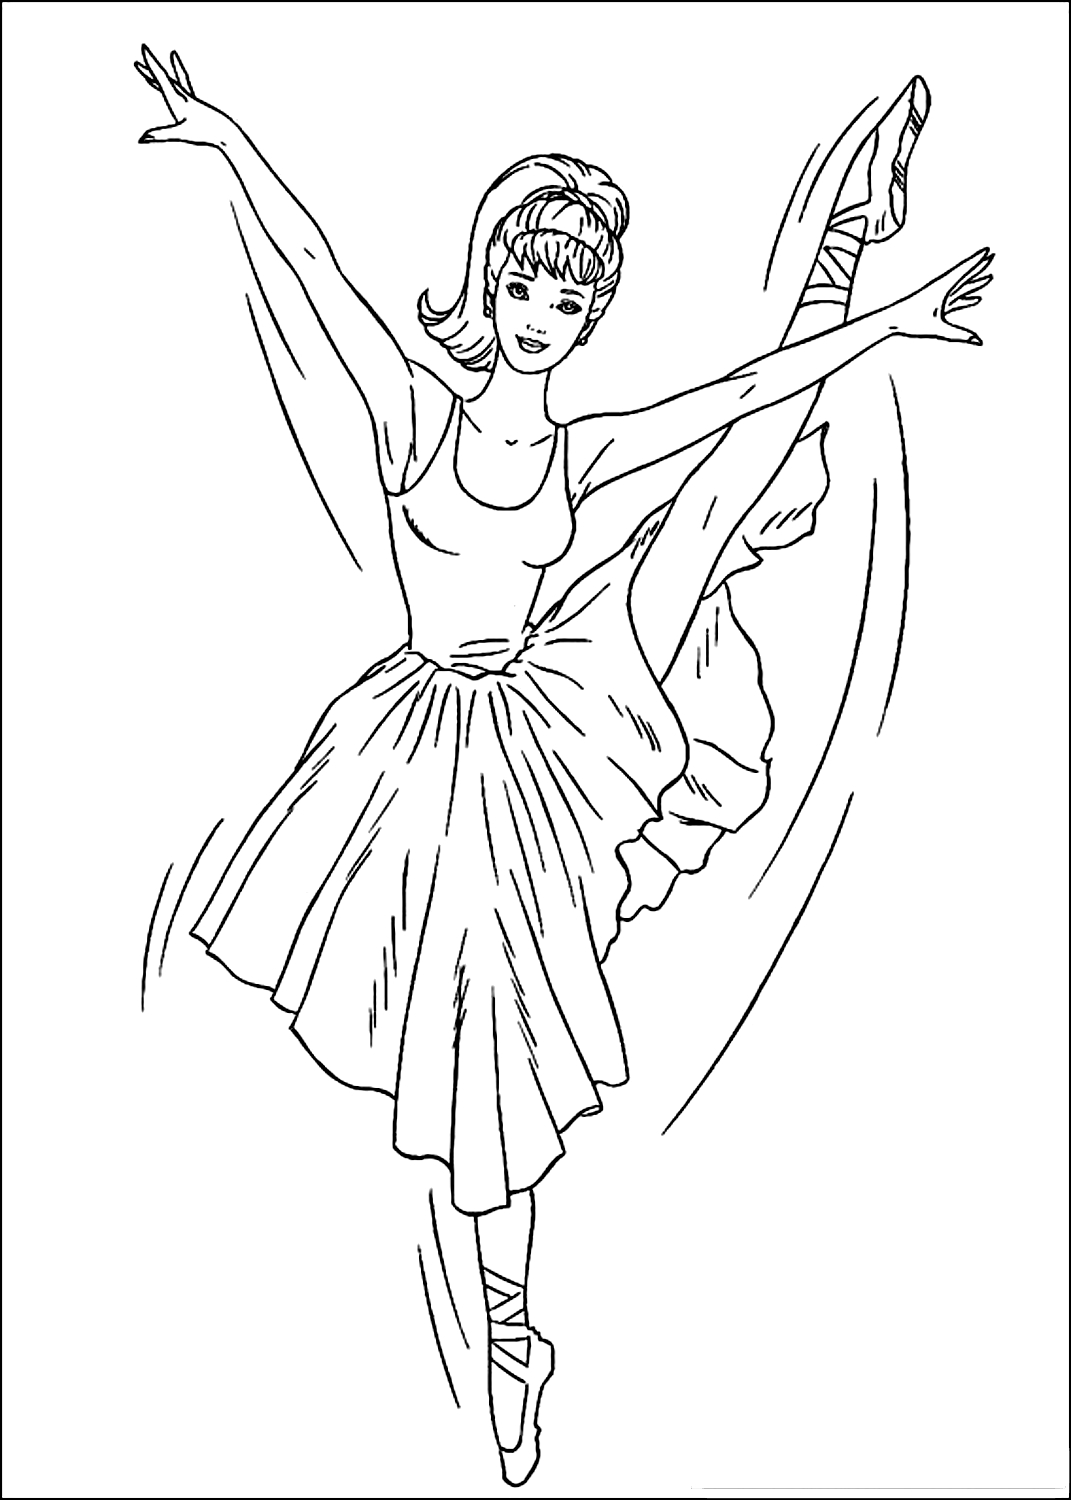 Barbie 45 Barbie coloring page to print and coloring